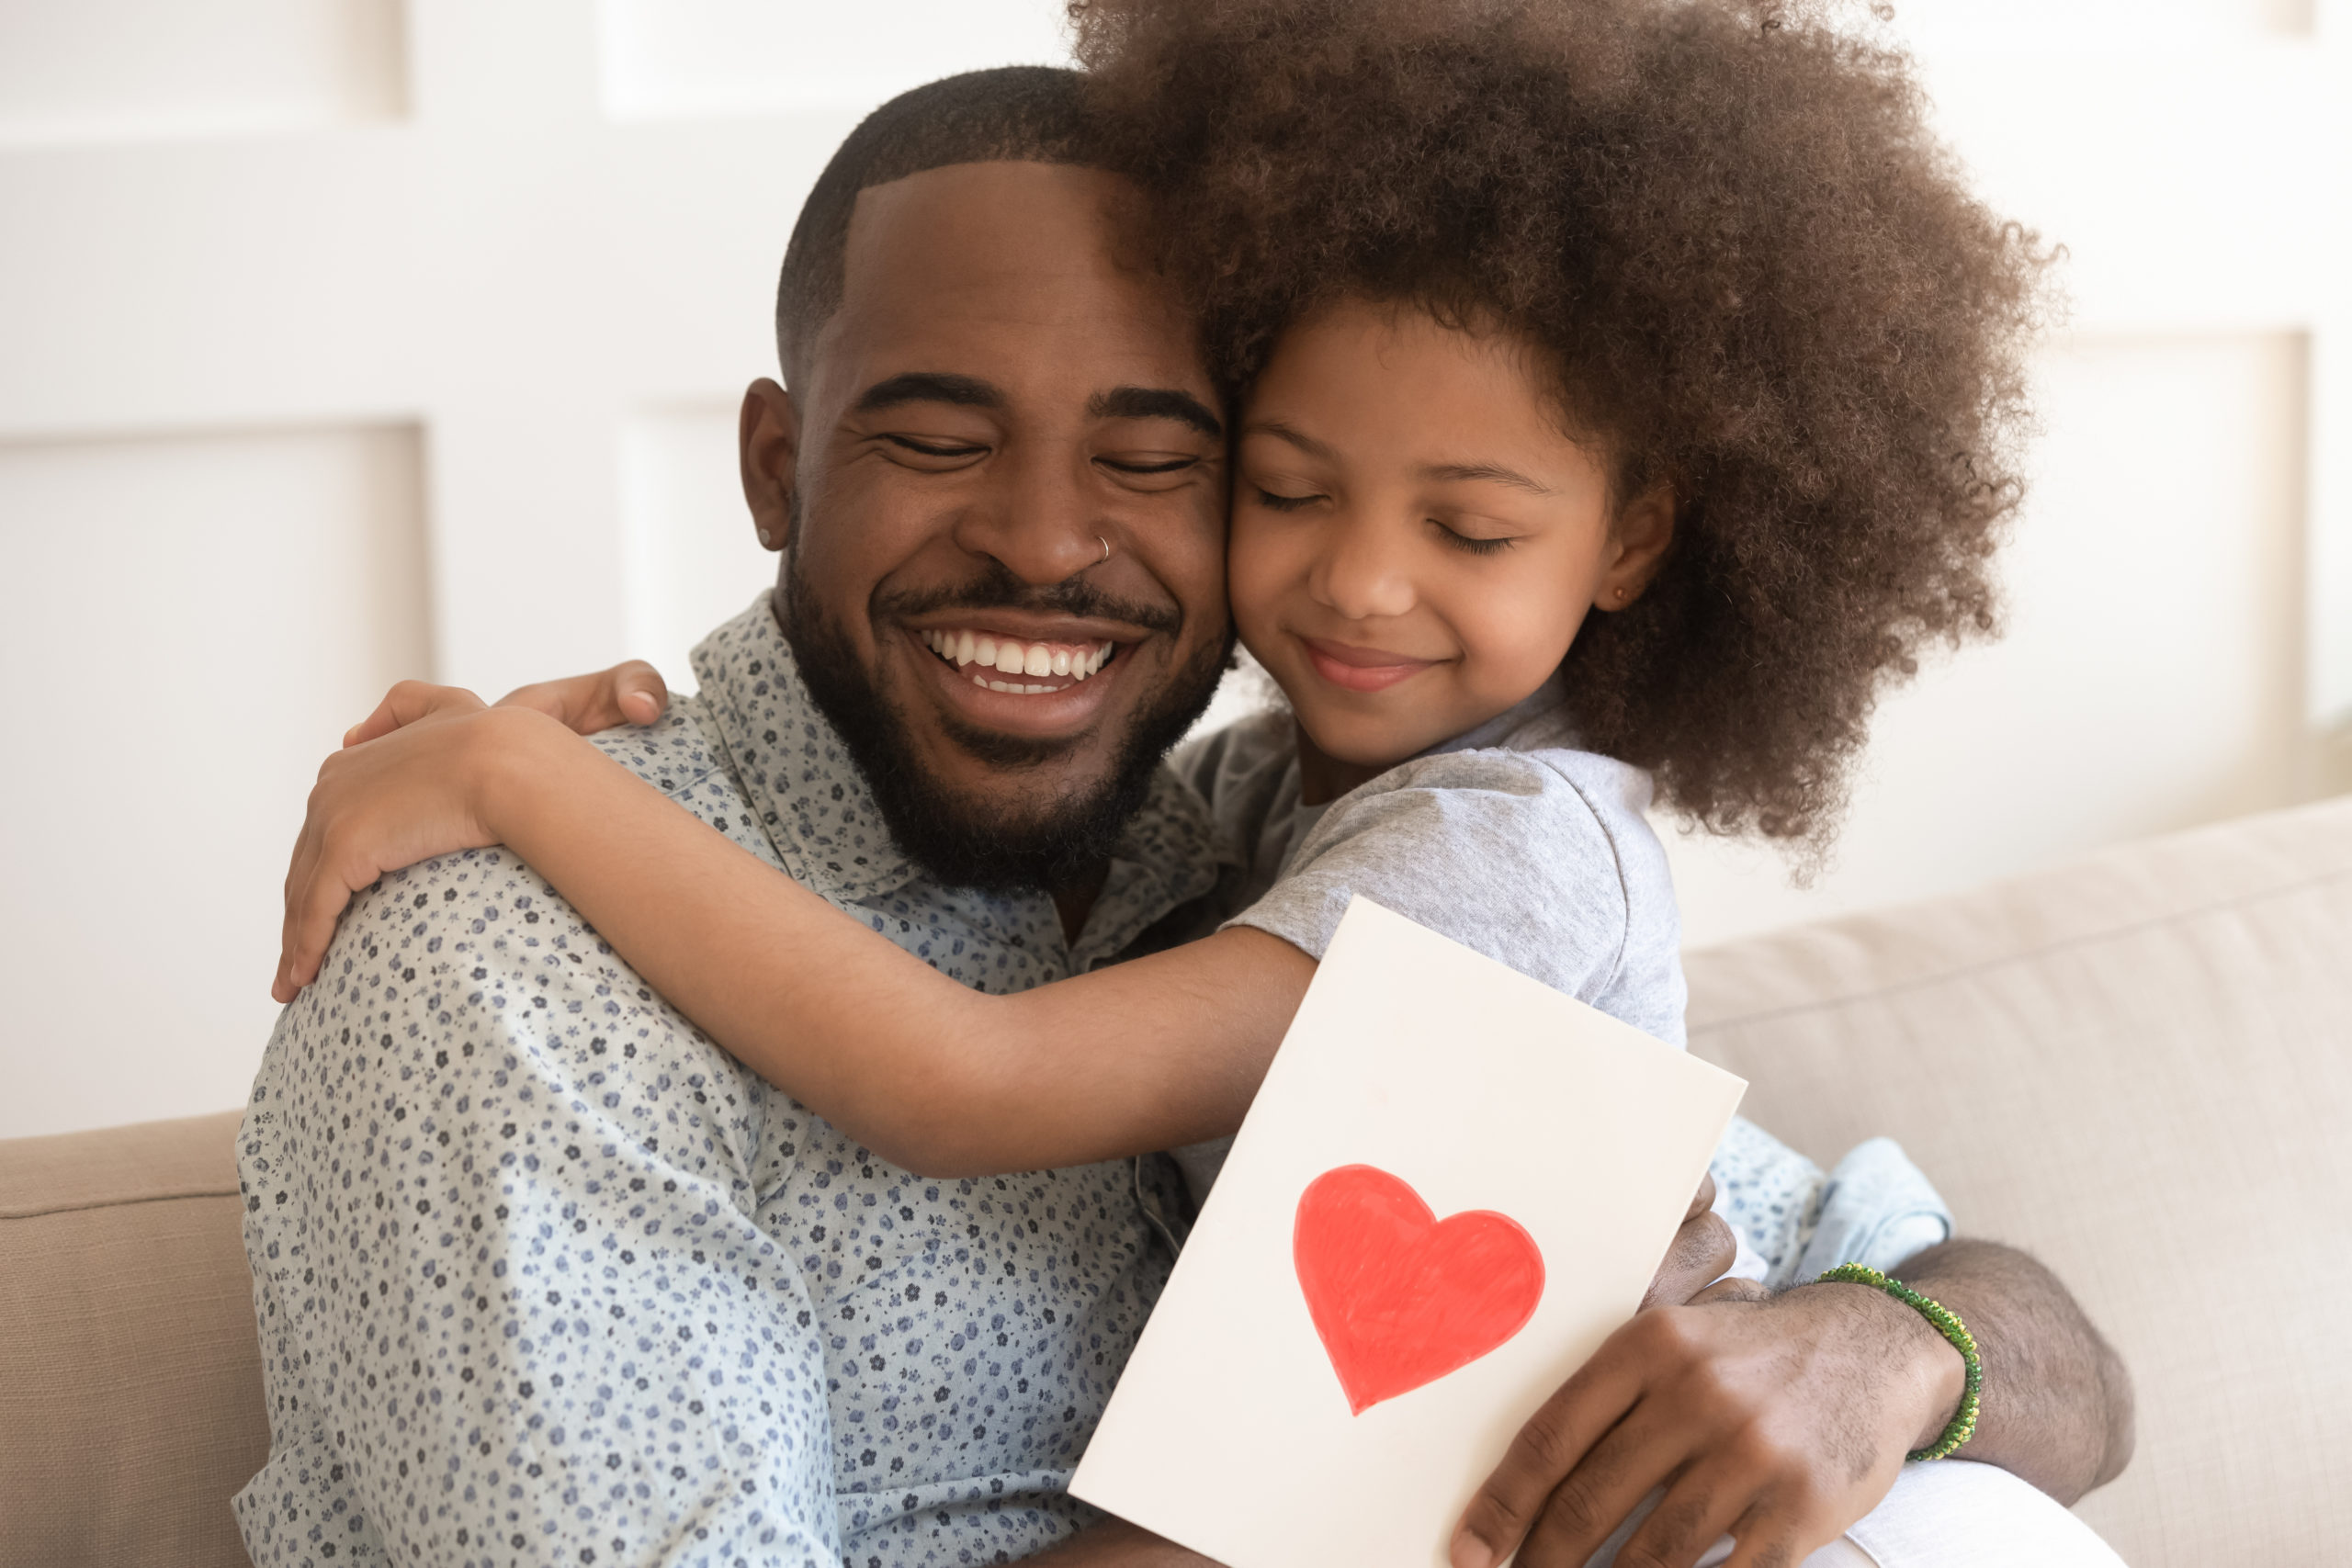 A black man hugging his black son while holding a card with a red heart painted on it